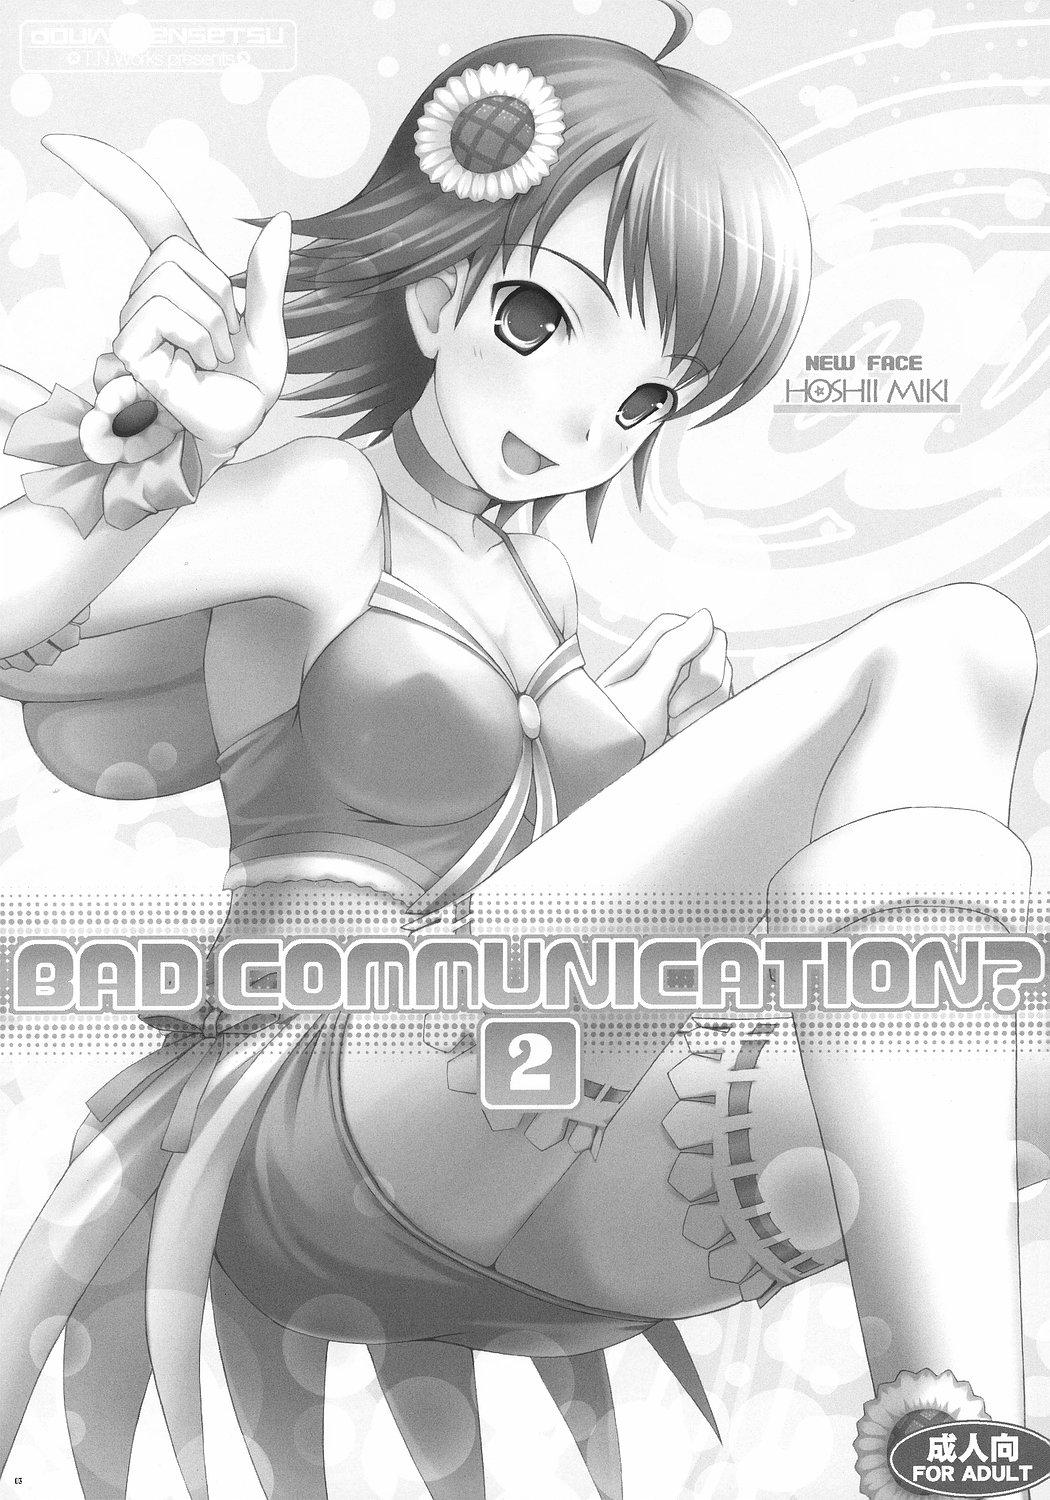 Phat BAD COMMUNICATION? 2 - The idolmaster Huge Boobs - Page 2